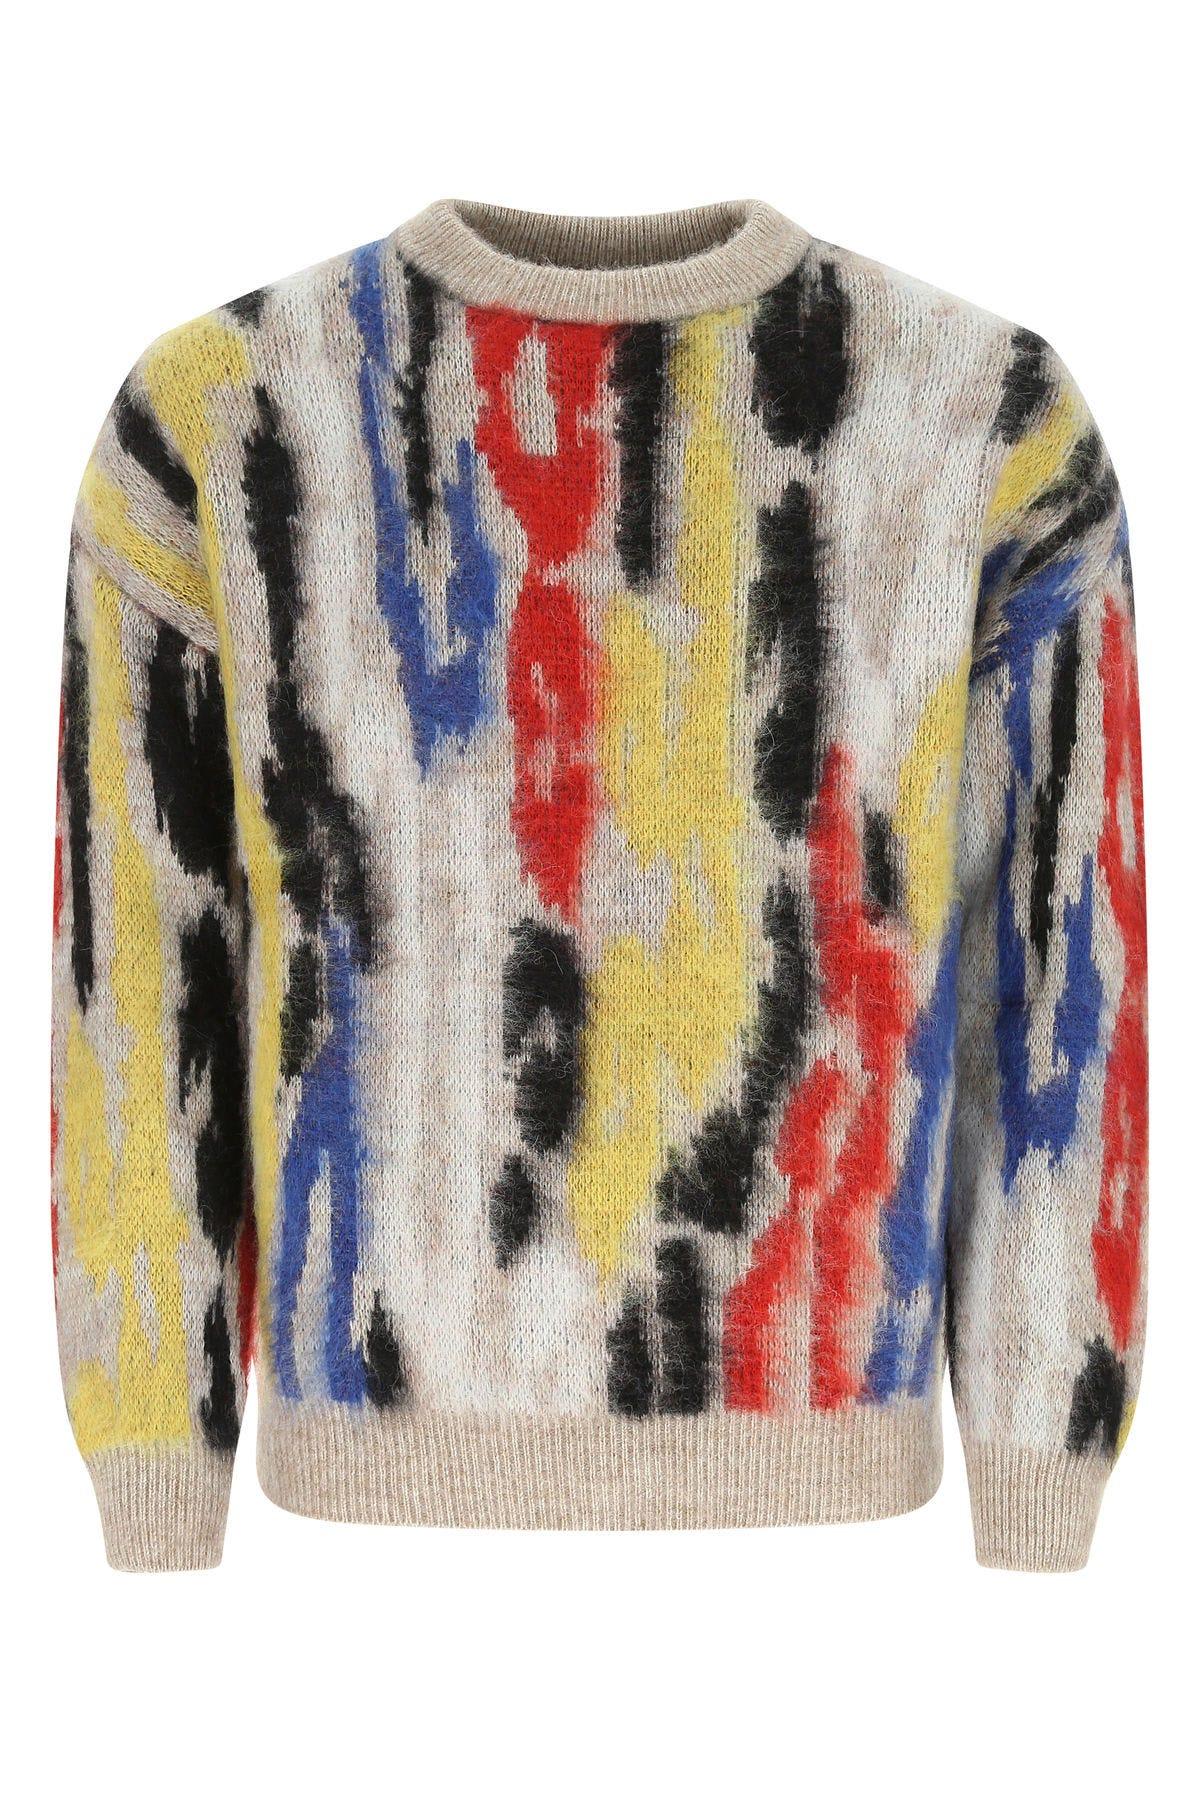 Saint Laurent Embroidered Wool Blend Sweater